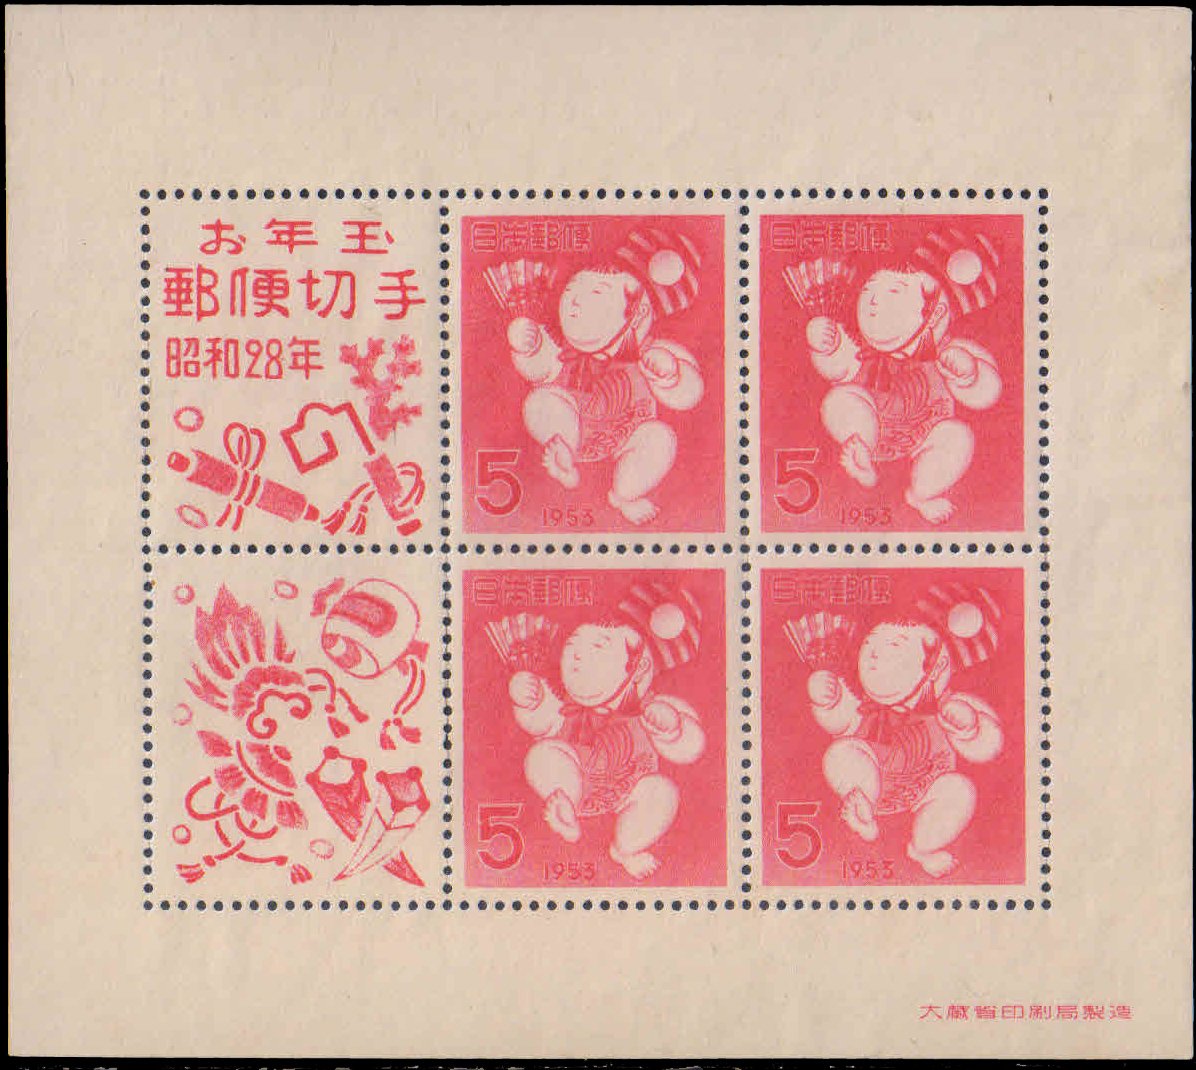 JAPAN 1953-New Year Greetings, Dancing Doll, Sheet of 4 Stamps+2 Labels, Mint Gum Wash, S.G. 699